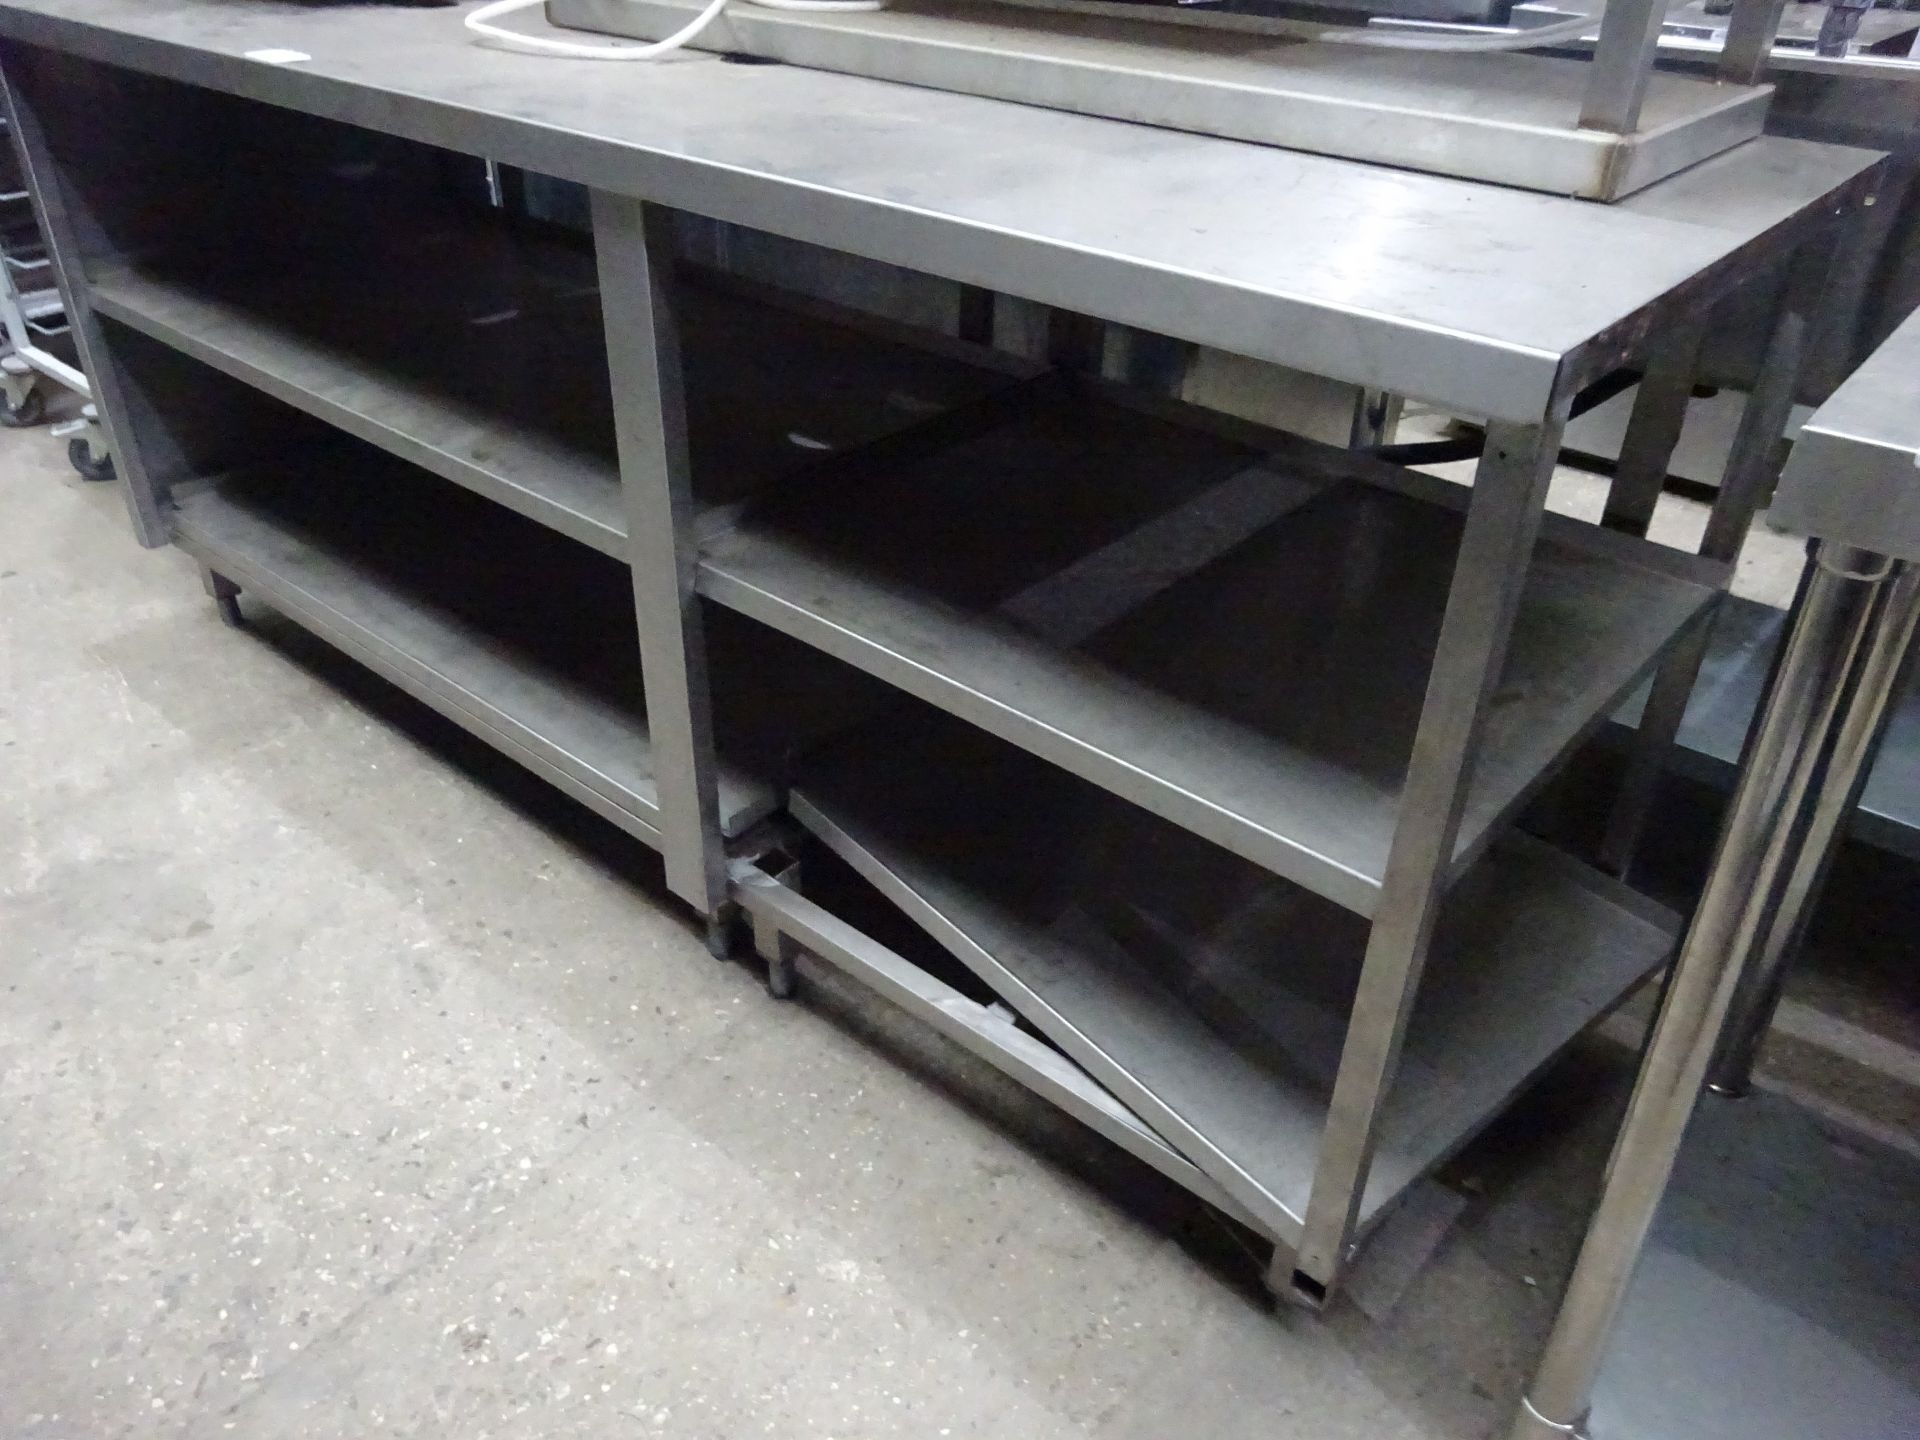 Stainless steel 3 tier prep table with centre holes, 205cms